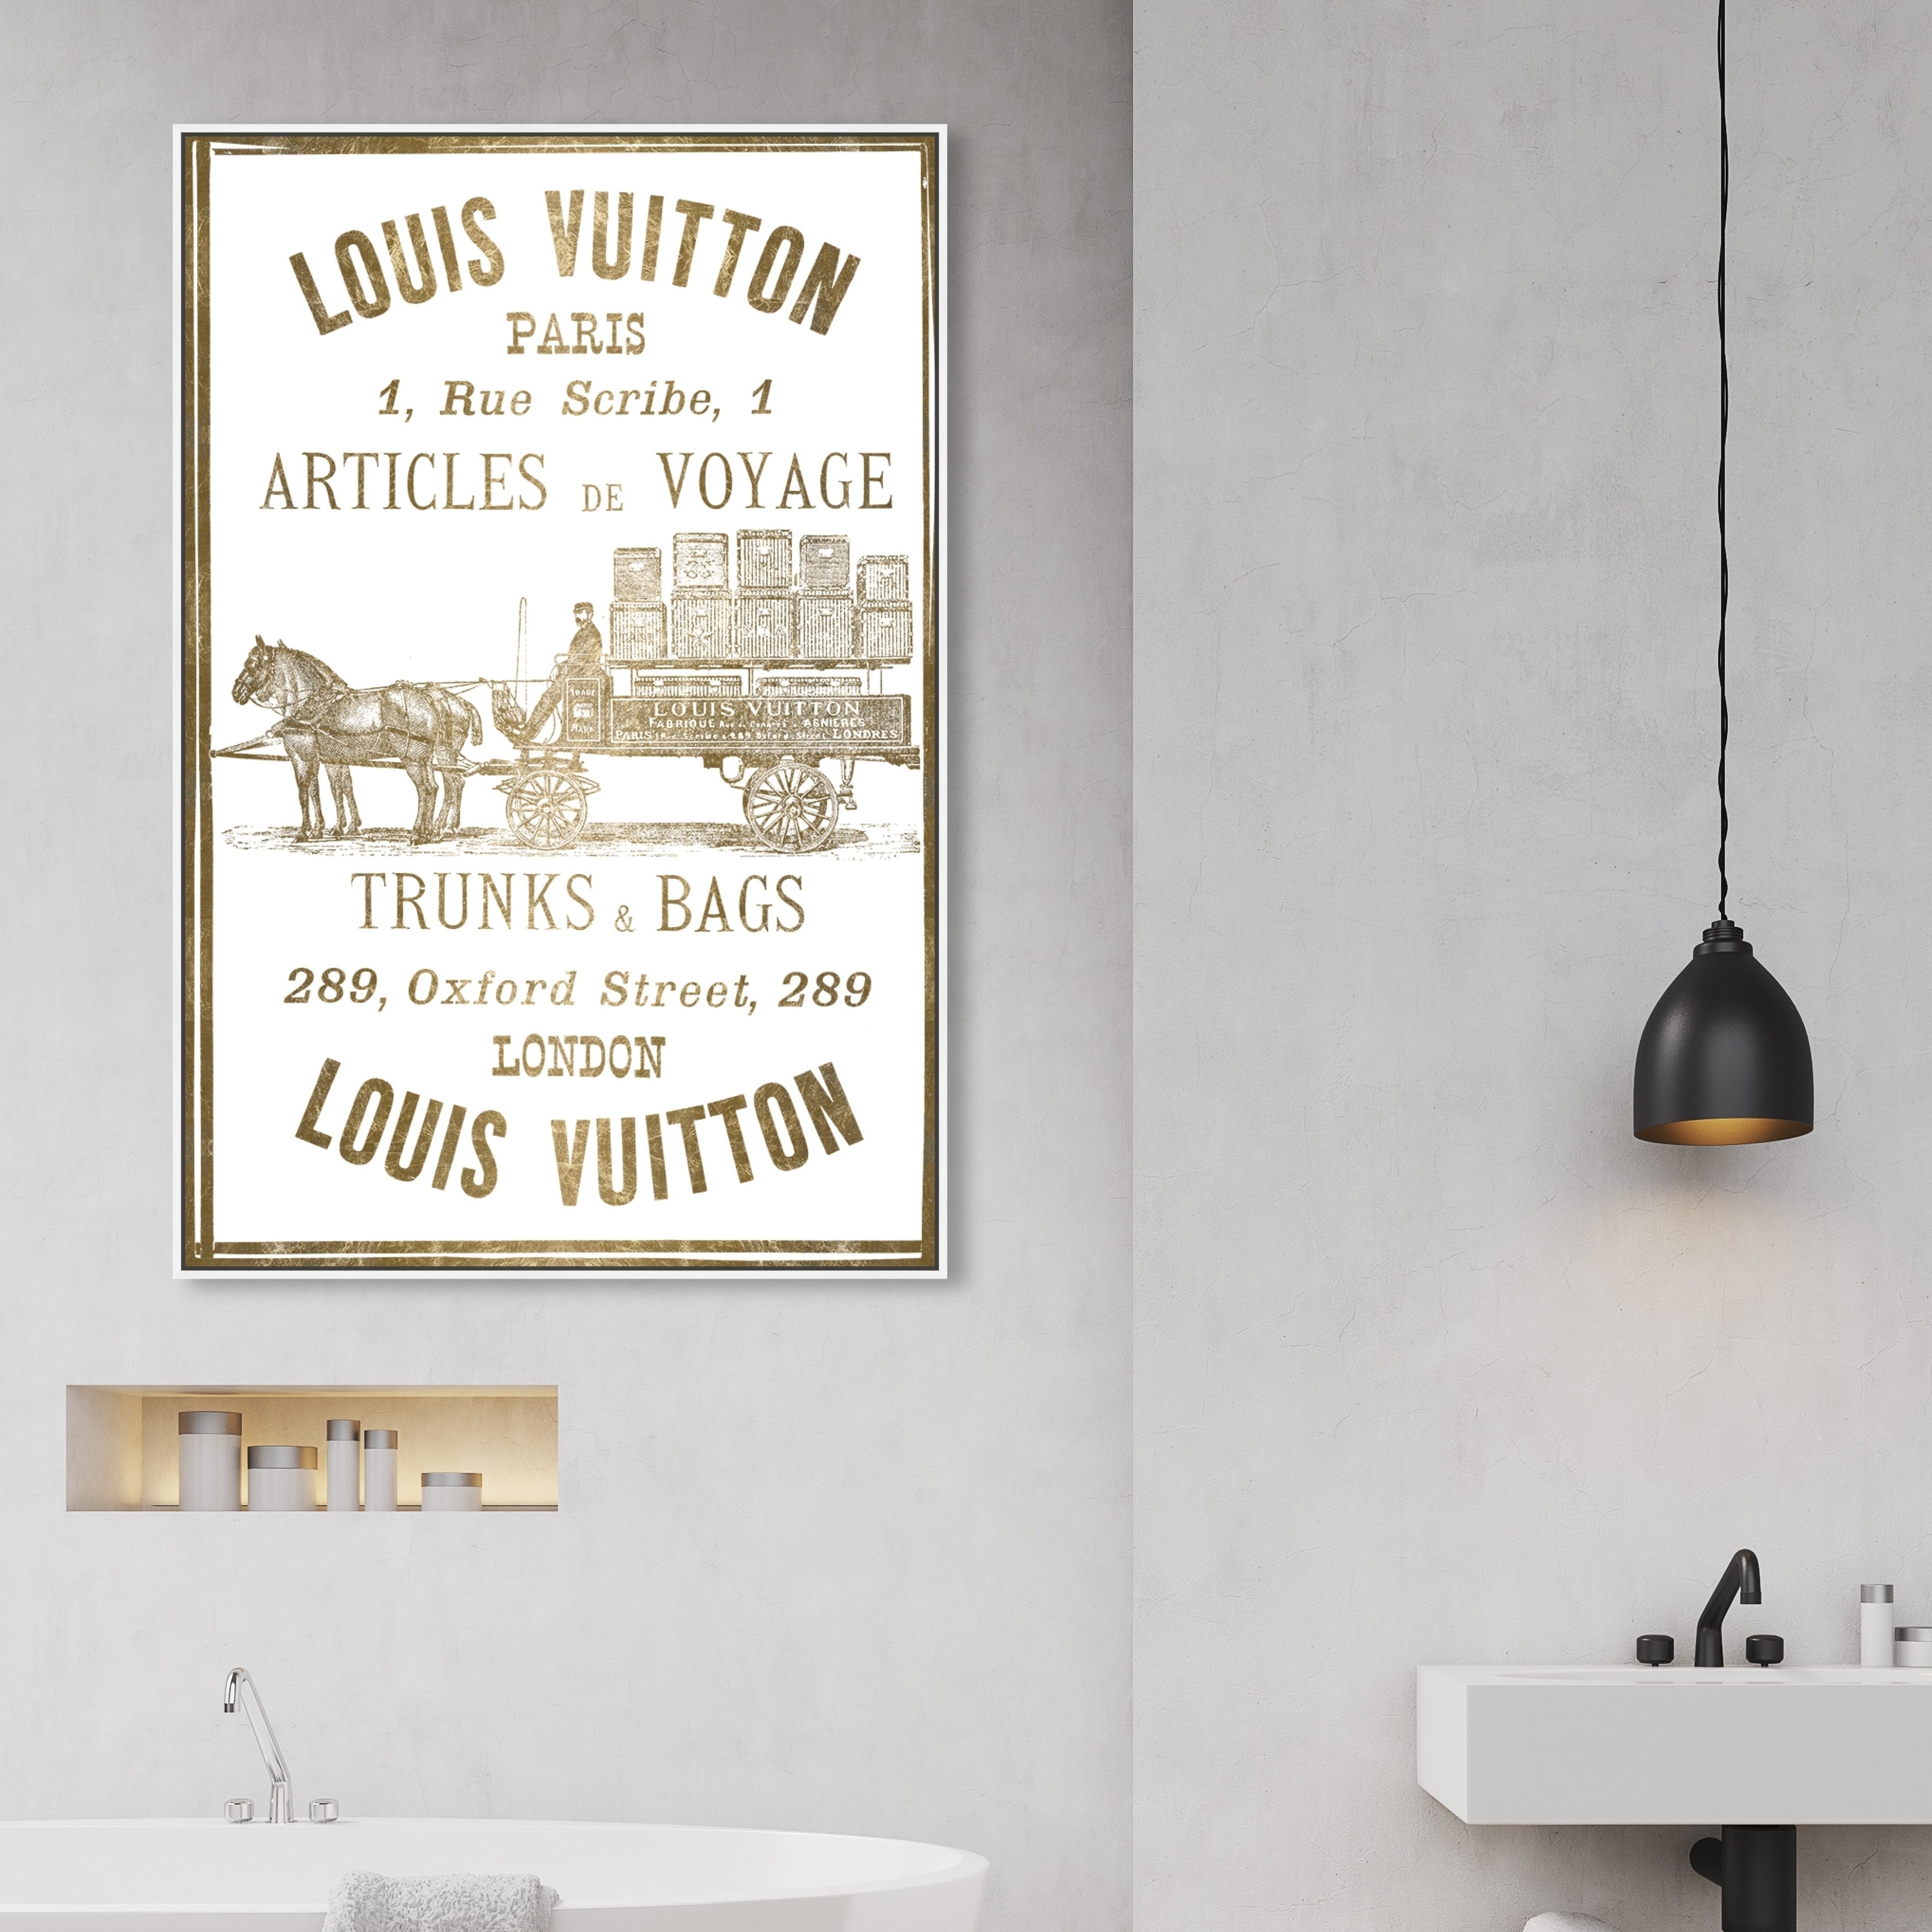 Oliver Gal Fashion and Glam Wall Art Framed Canvas Prints 'Articles de Voyage Gold Leaf' Road Signs - Gold, White - 30 x 45